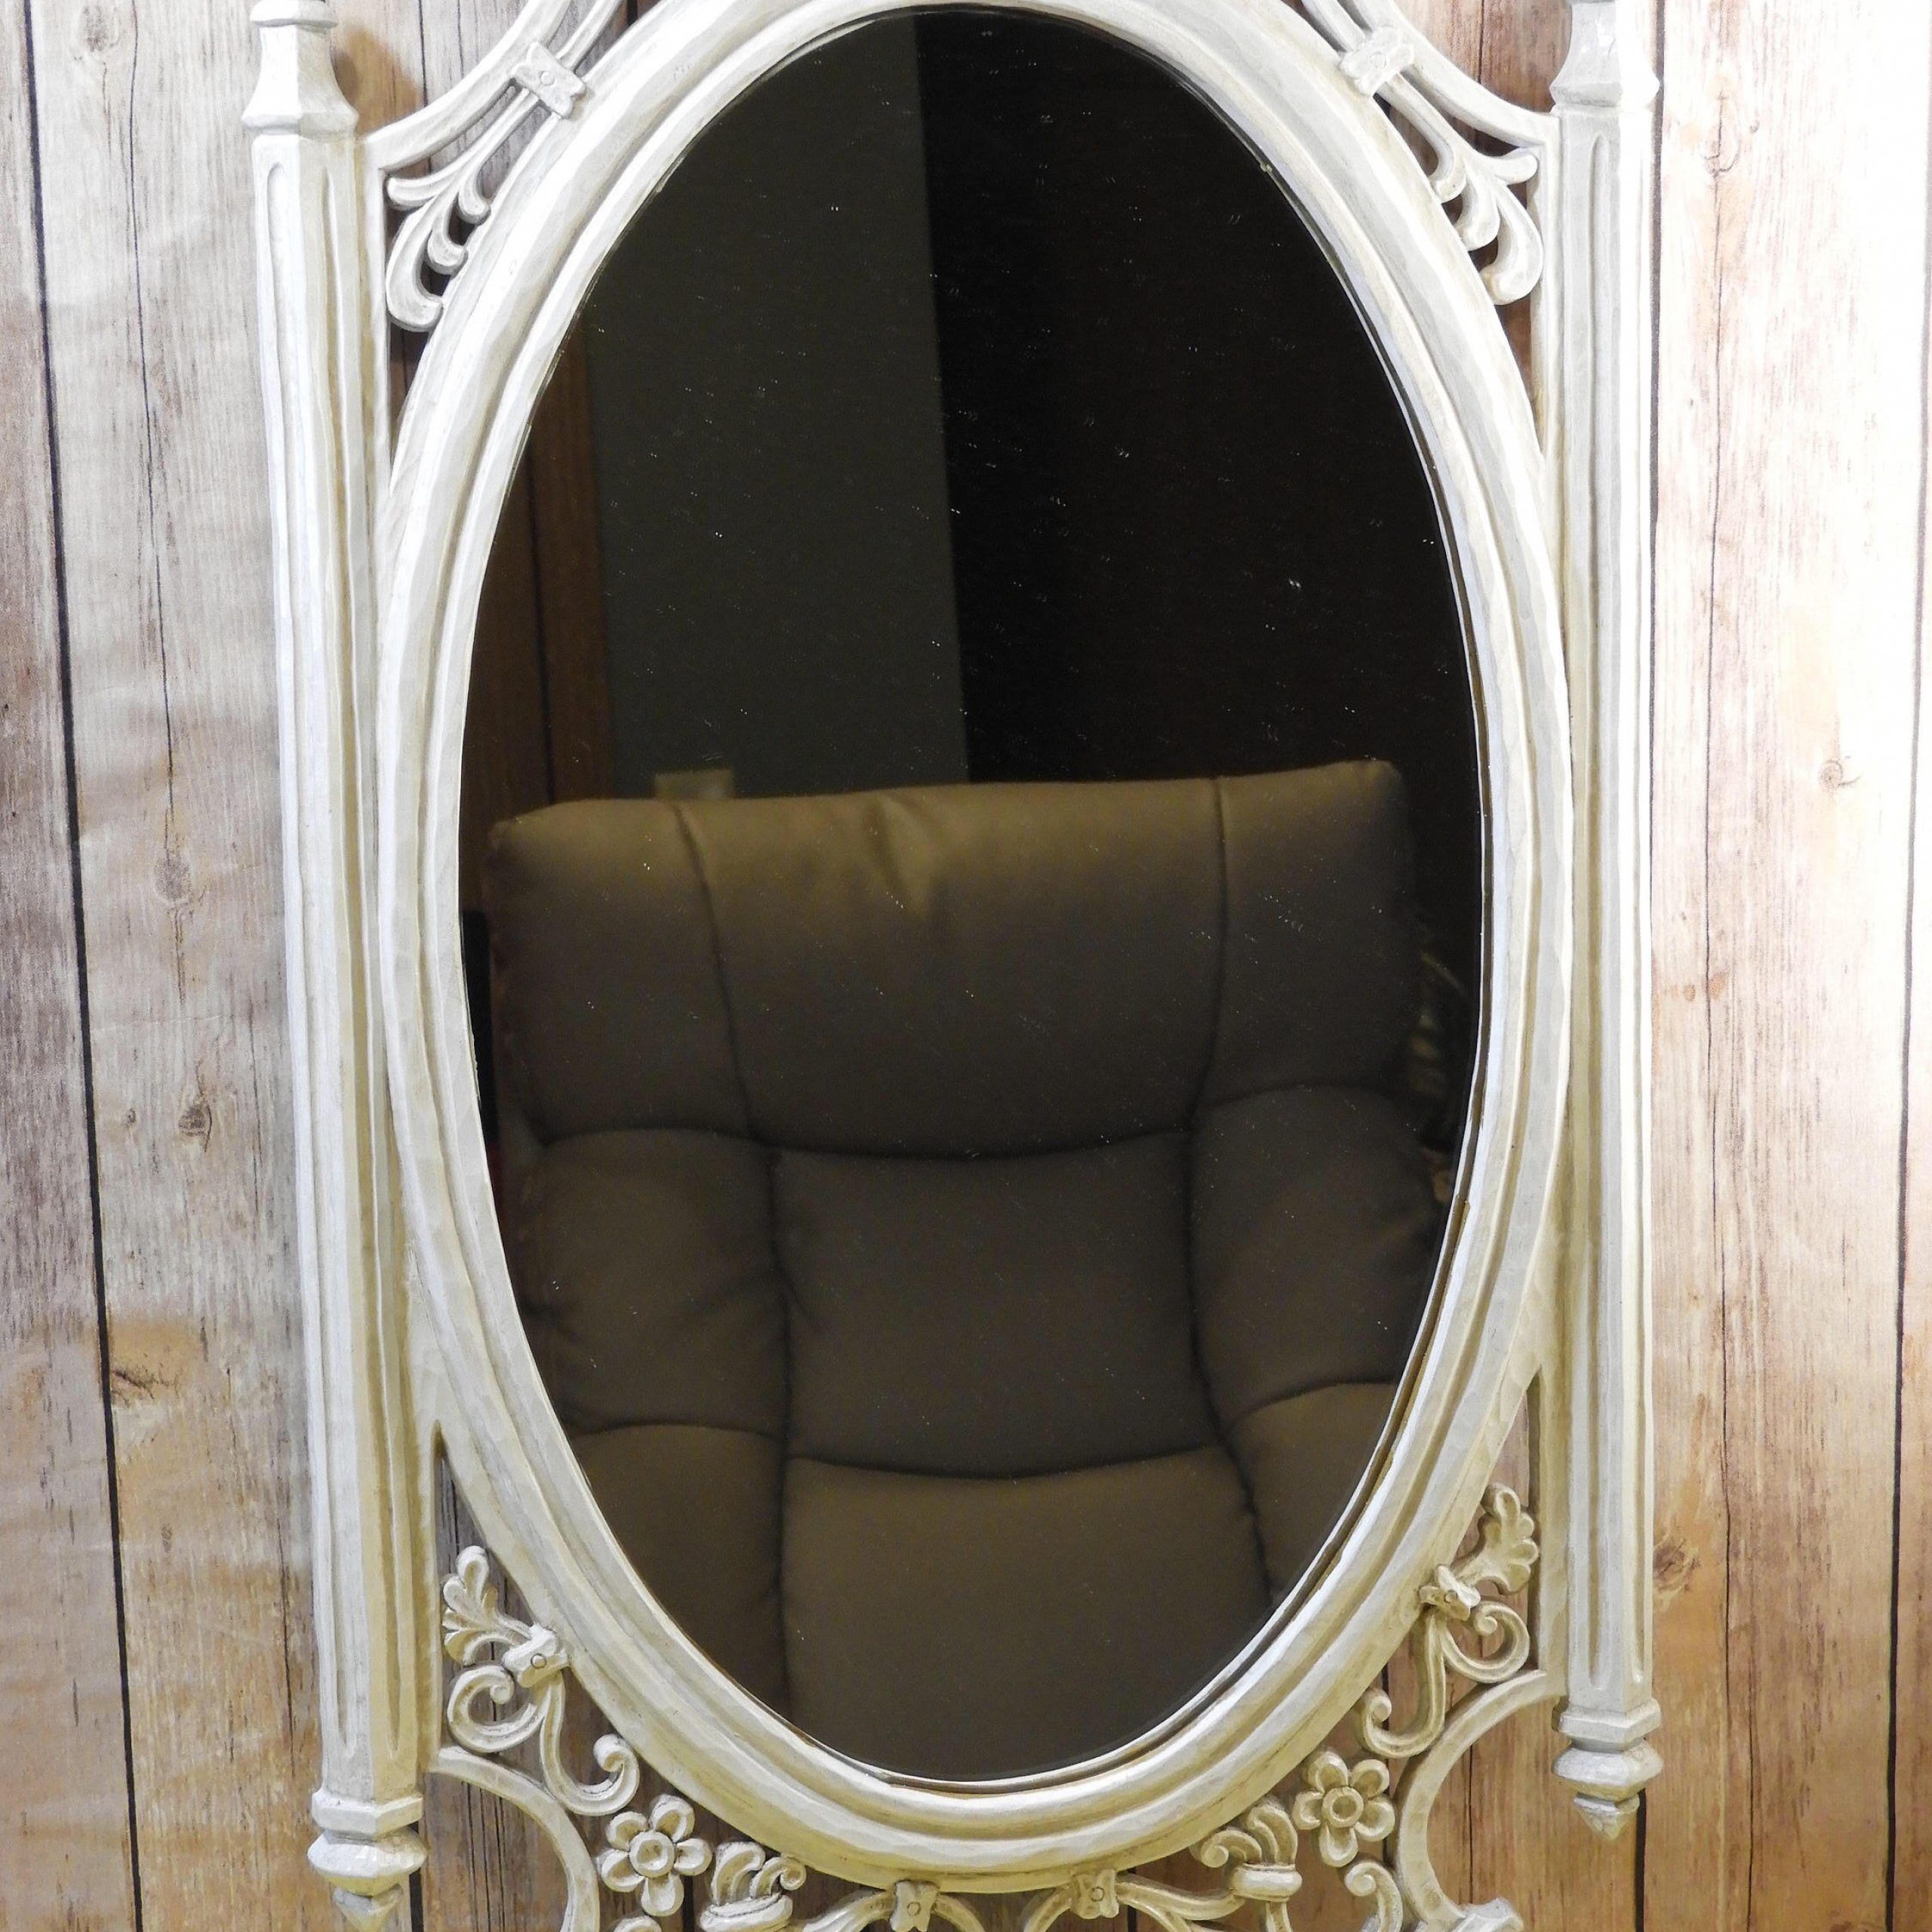 Vintage Antiqued White Wall Mirror, Decorative Syroco Wall Hanging Pertaining To White Wall Mirrors (View 5 of 15)